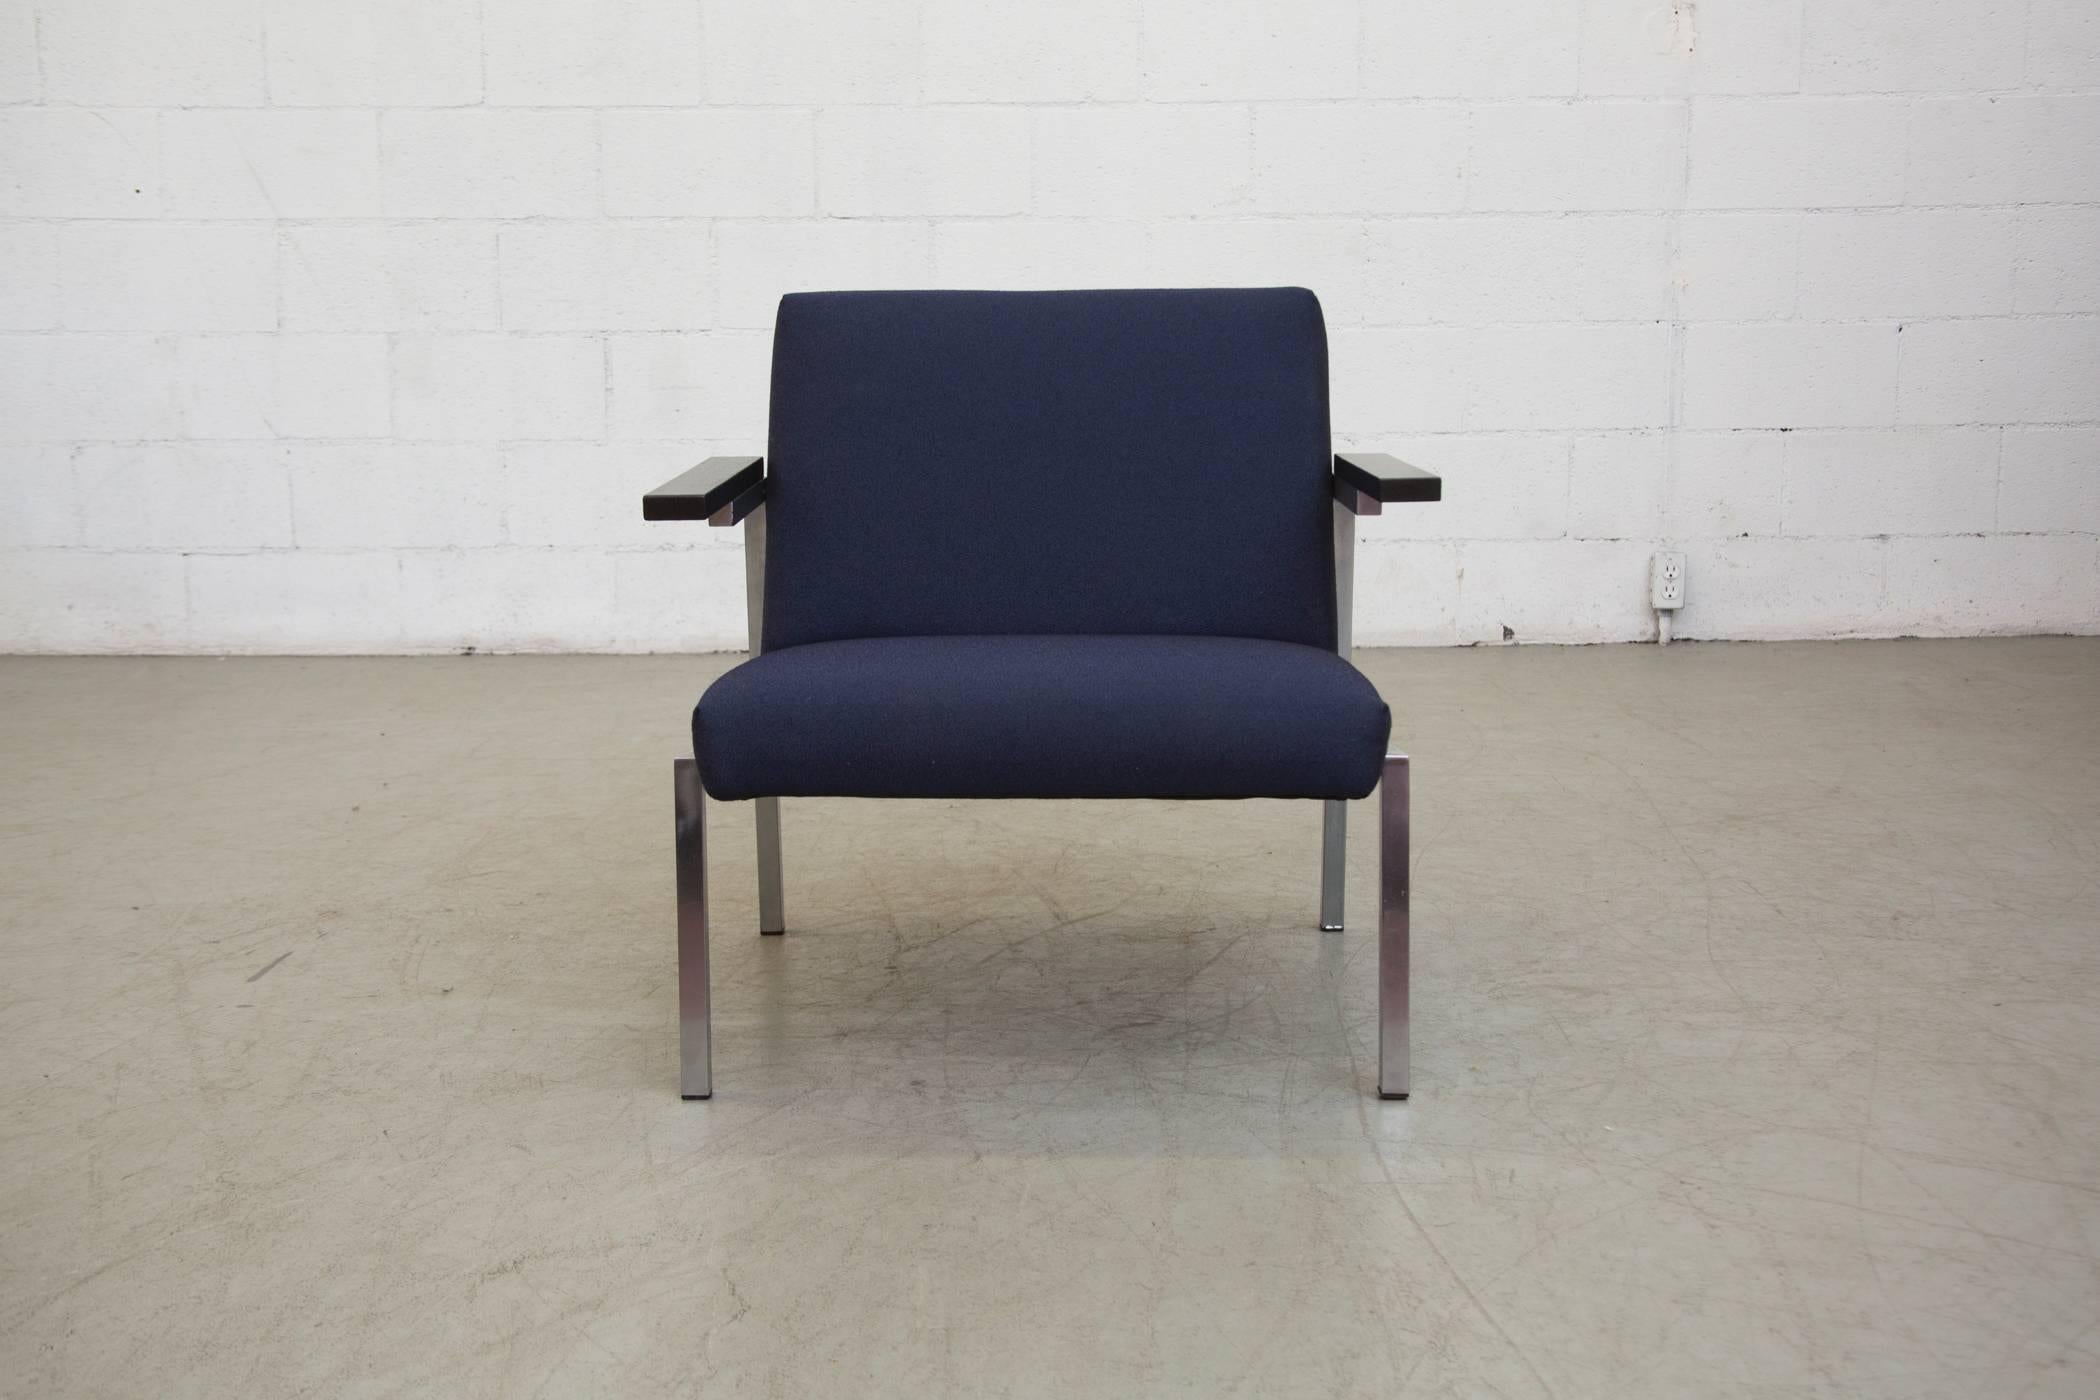 Martin Visser for spectrum SZ 66 lounge chair (A her's version to the SZ 67 chair) with a chrome Frame, Ebonized armrests, newly upholstered in navy. Frame is in original condition with some wear consistent with age and use. Martin Visser began